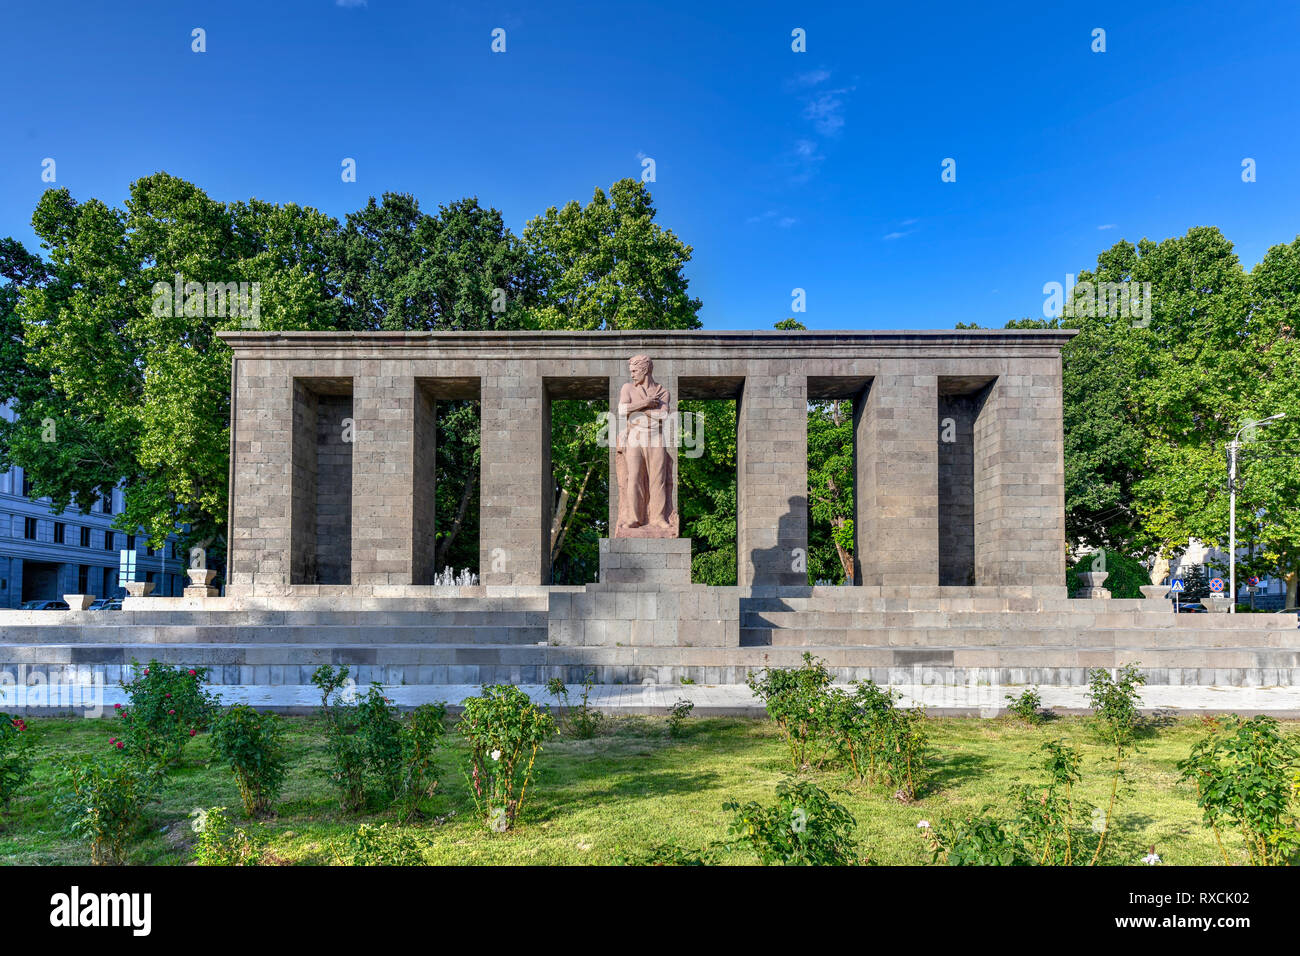 Shahumyan Square in Yerevan, Armenia. Stepan Georgevich Shaumian was a Bolshevik revolutionary and politician active throughout the Caucasus. Stock Photo